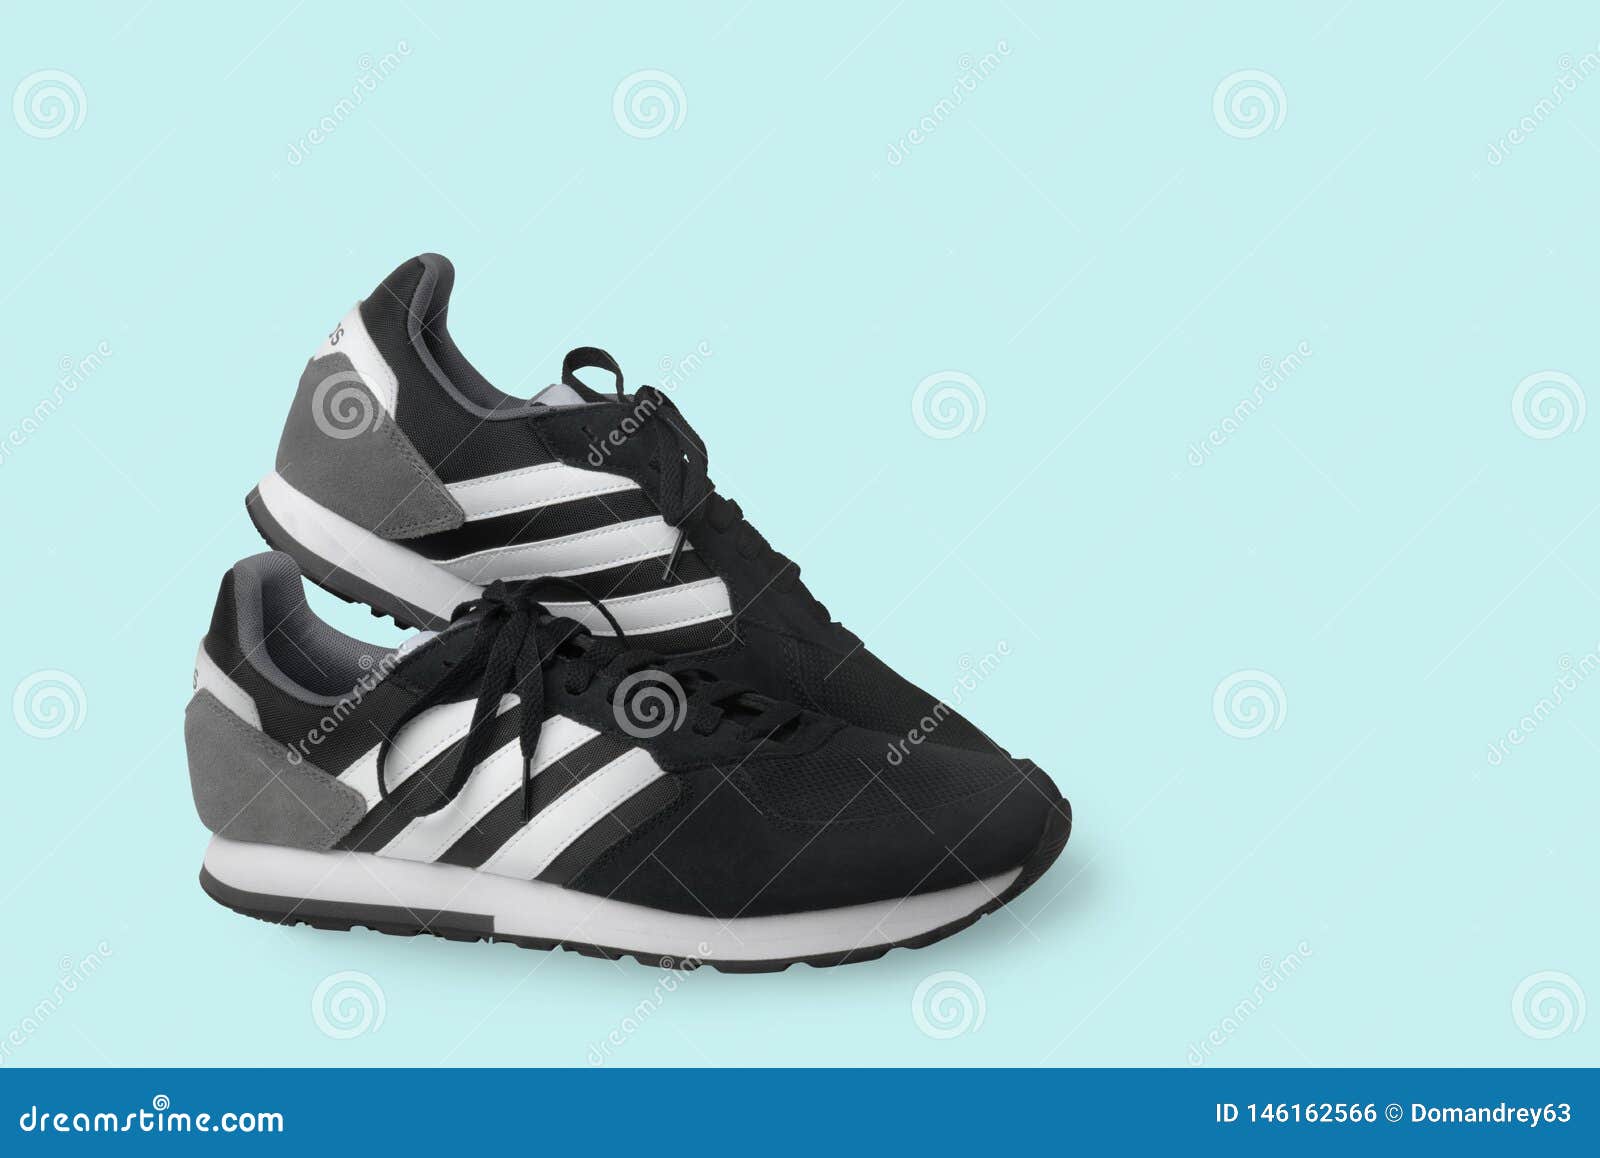 dilute processing Contributor Adidas Sports Shoes Sneakers Black on a White Background. Isolated. Samara.  Russia Editorial Photo - Image of design, active: 146162566